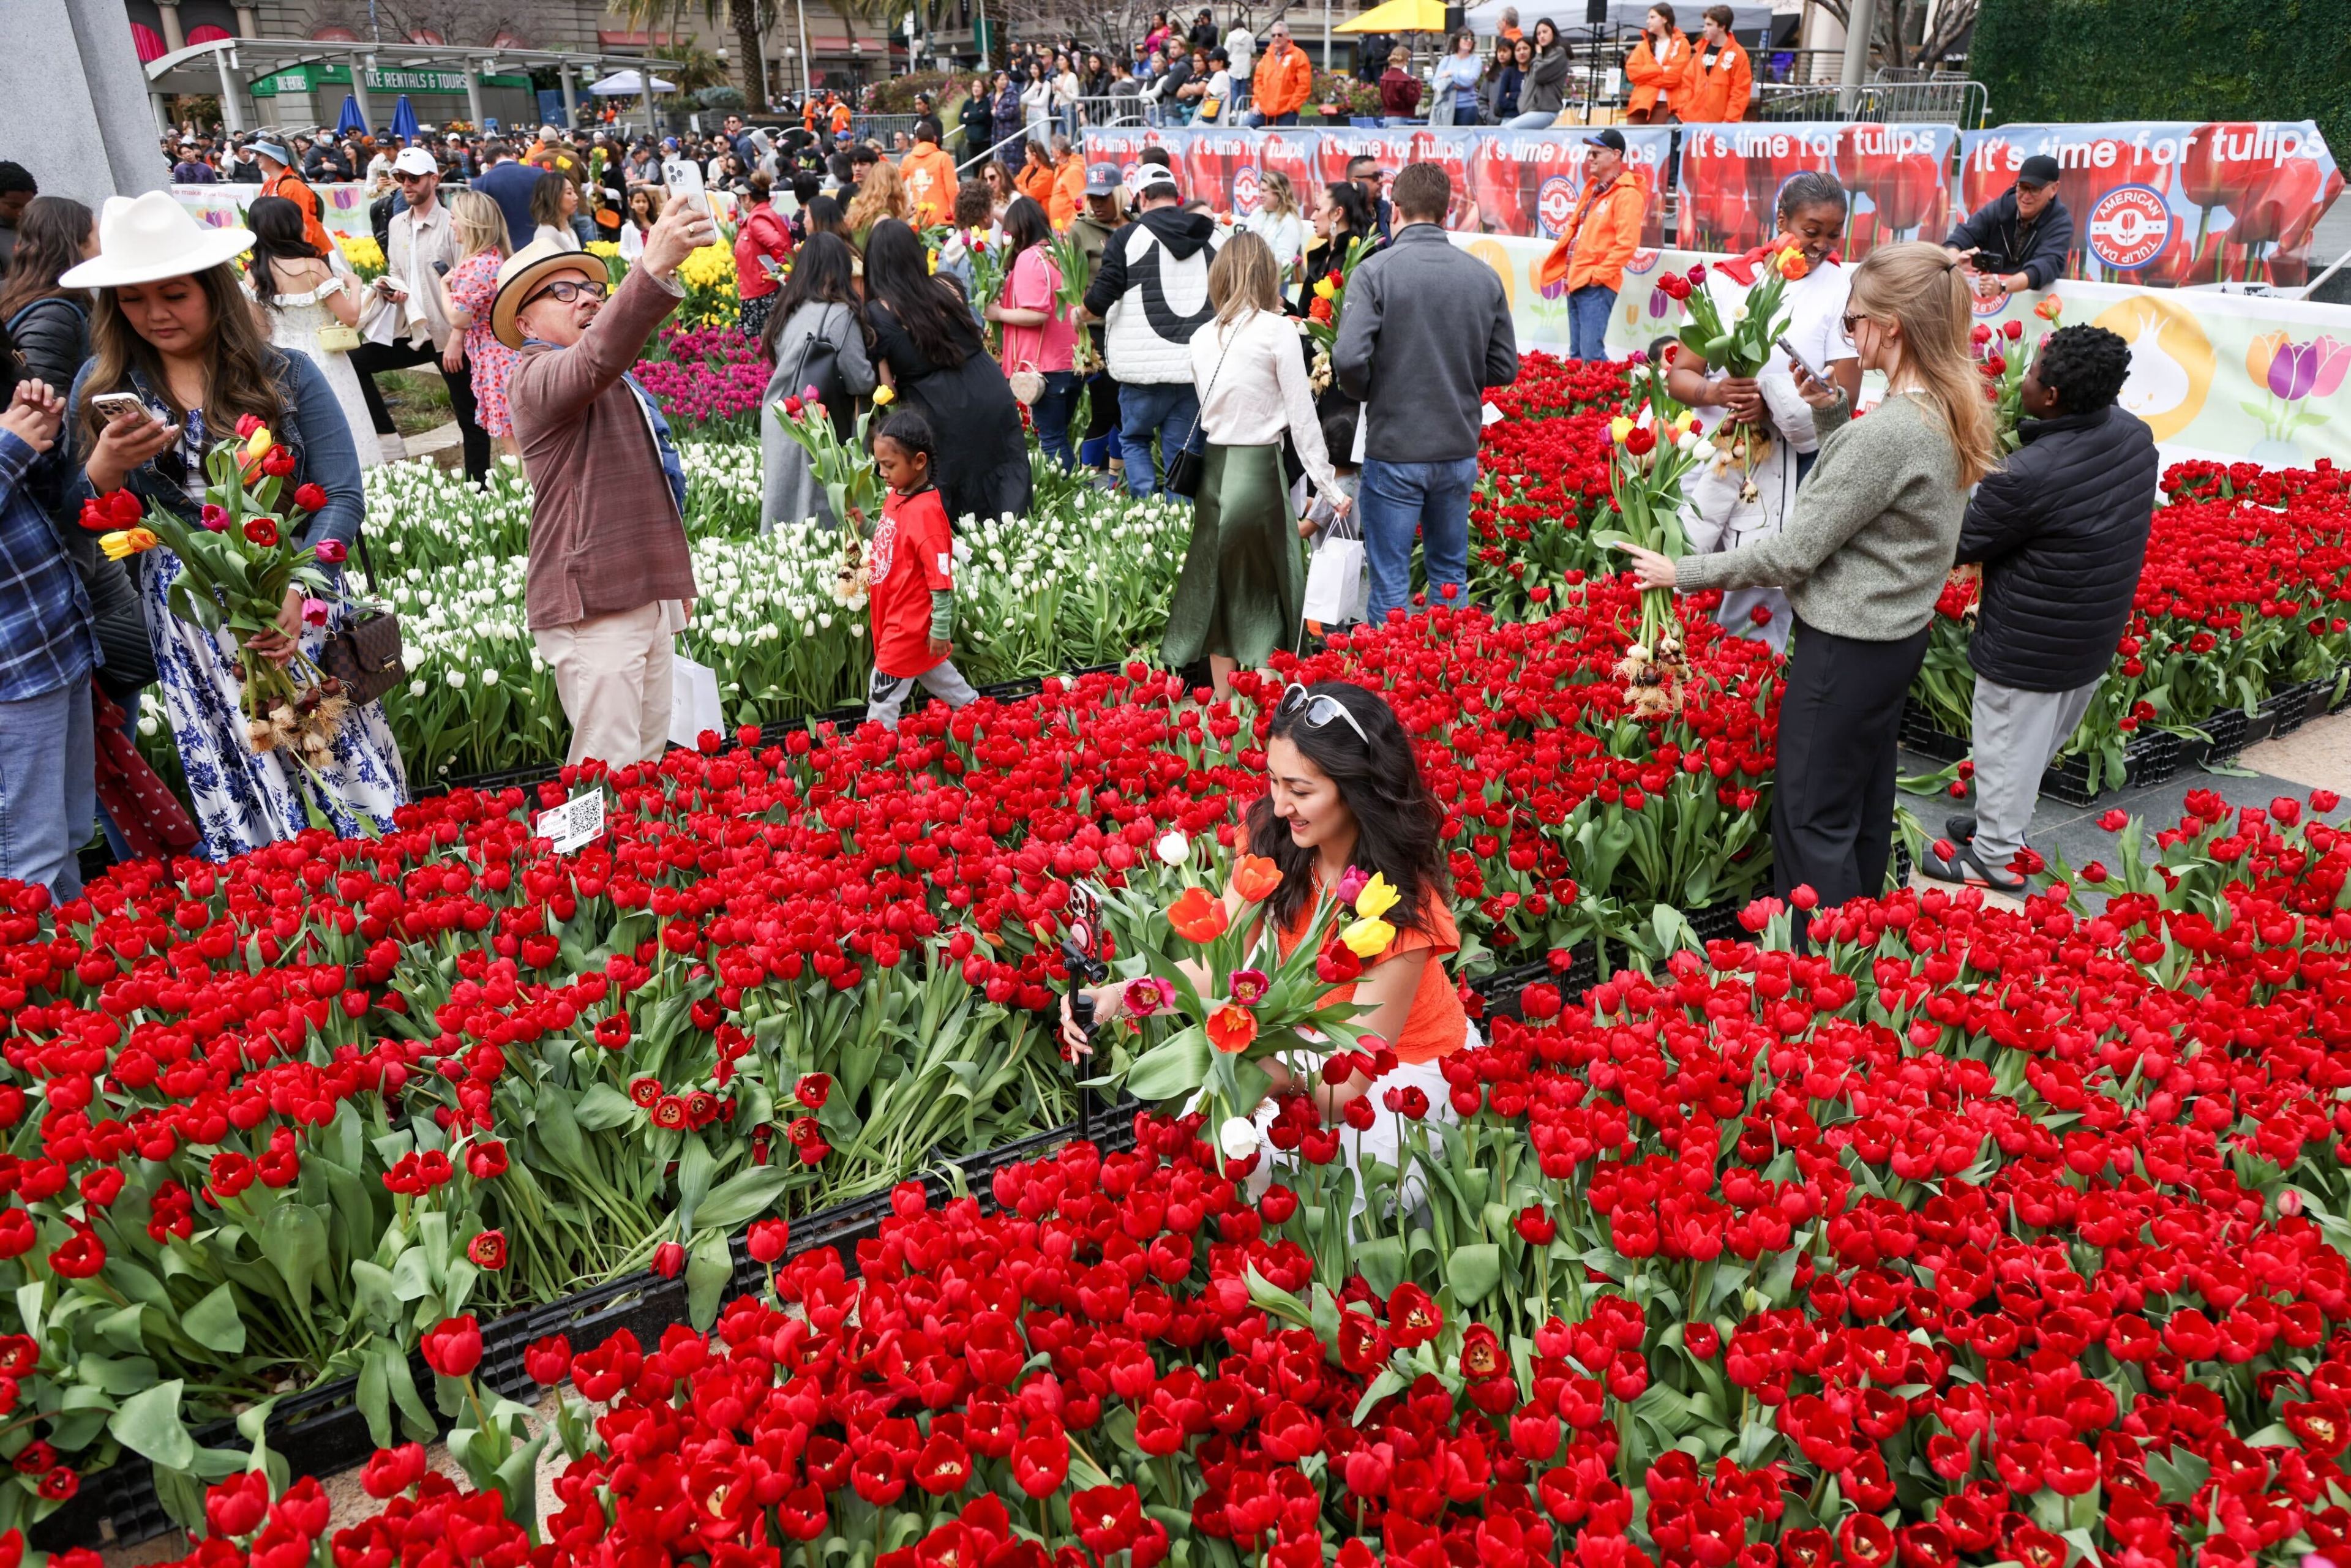 People are enjoying a vibrant tulip garden in an outdoor setting, with various colors on display.